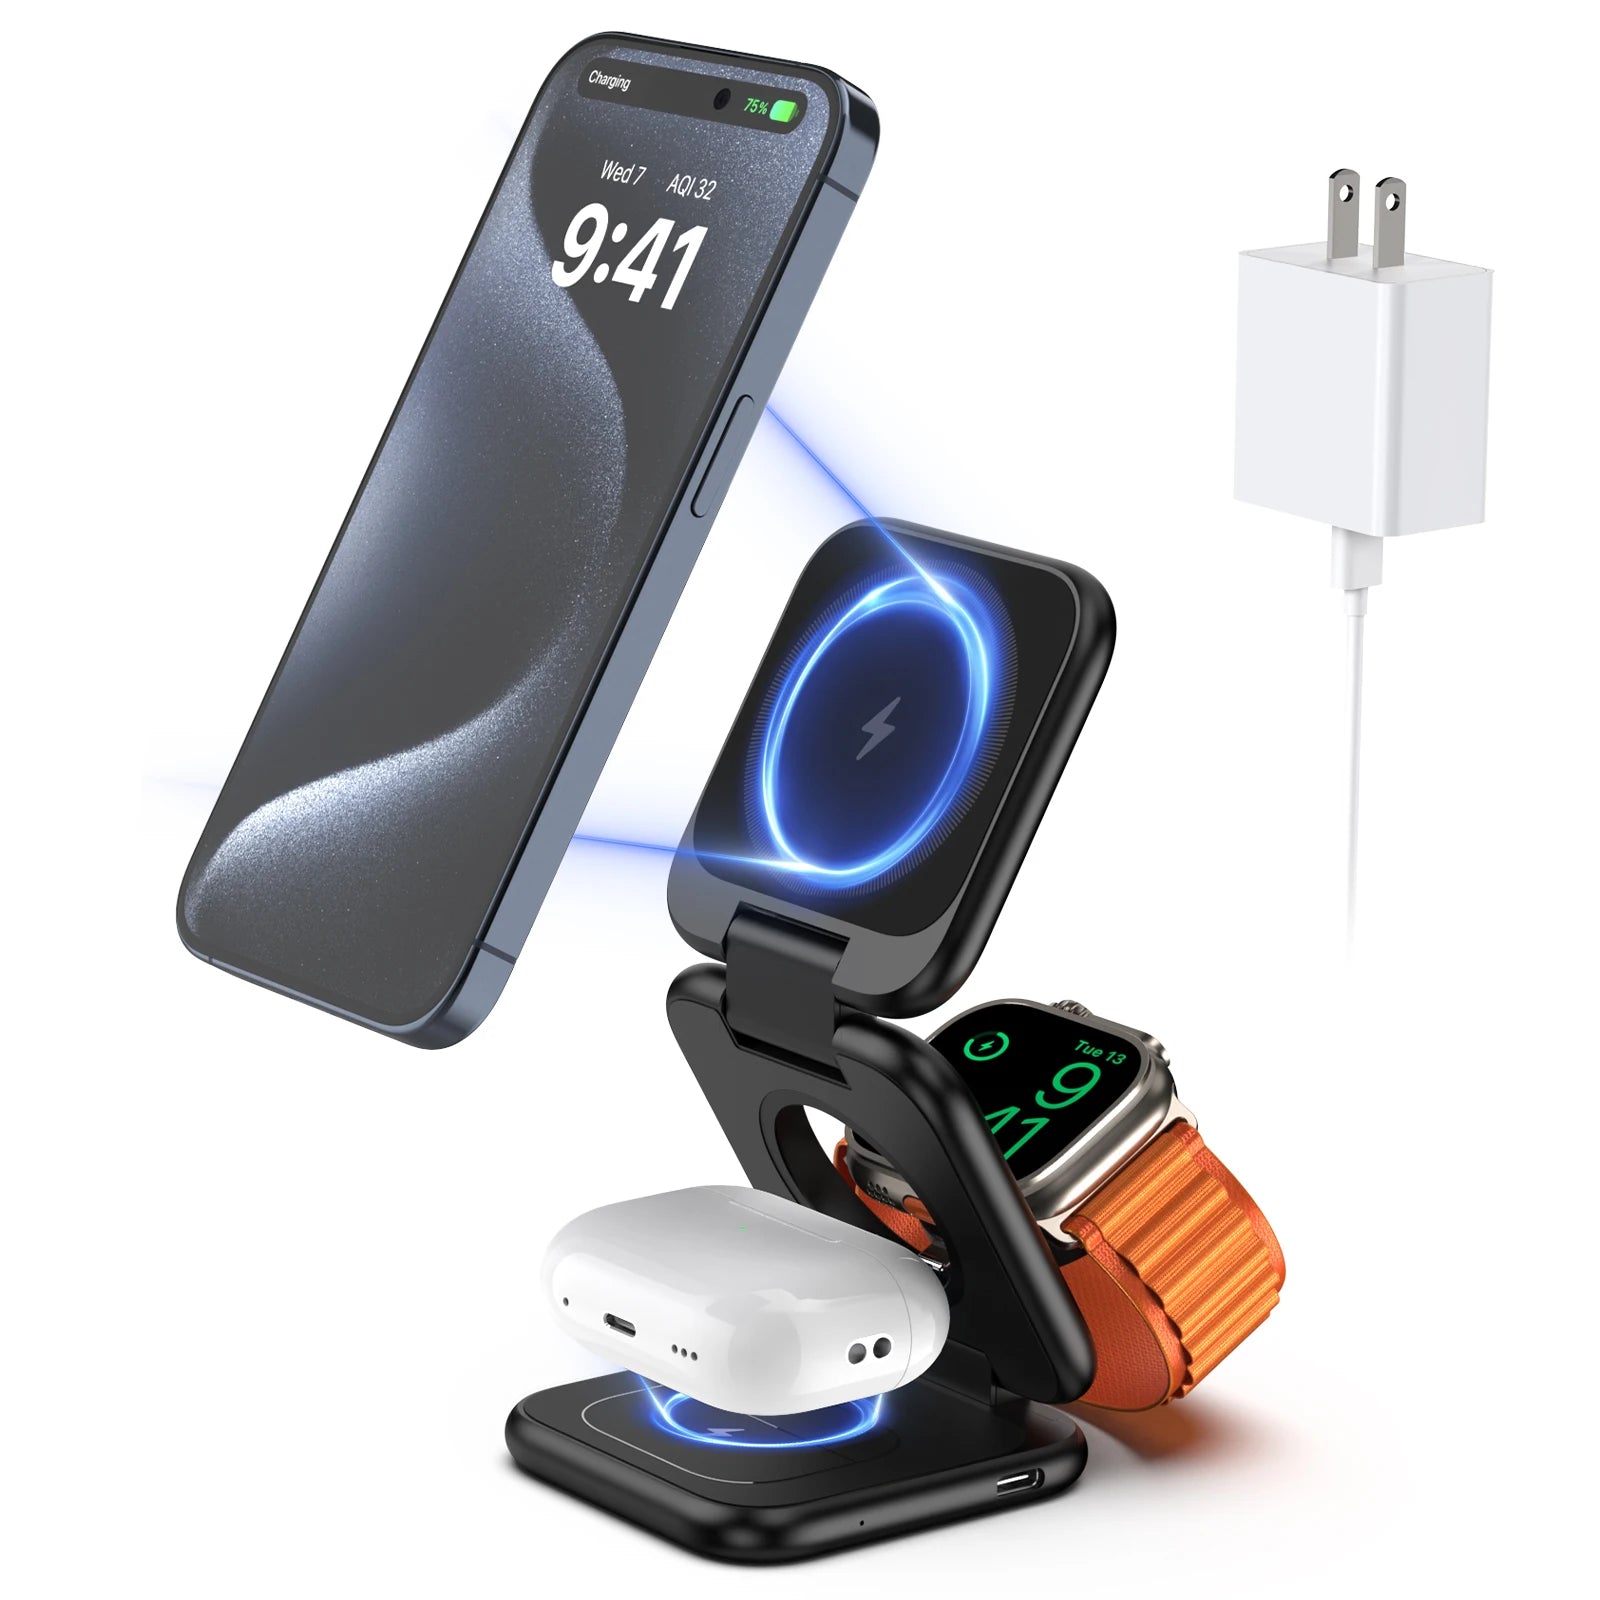 iTech® Kuxiu 3 in 1 Magnetic Wireless Charging Station⚡